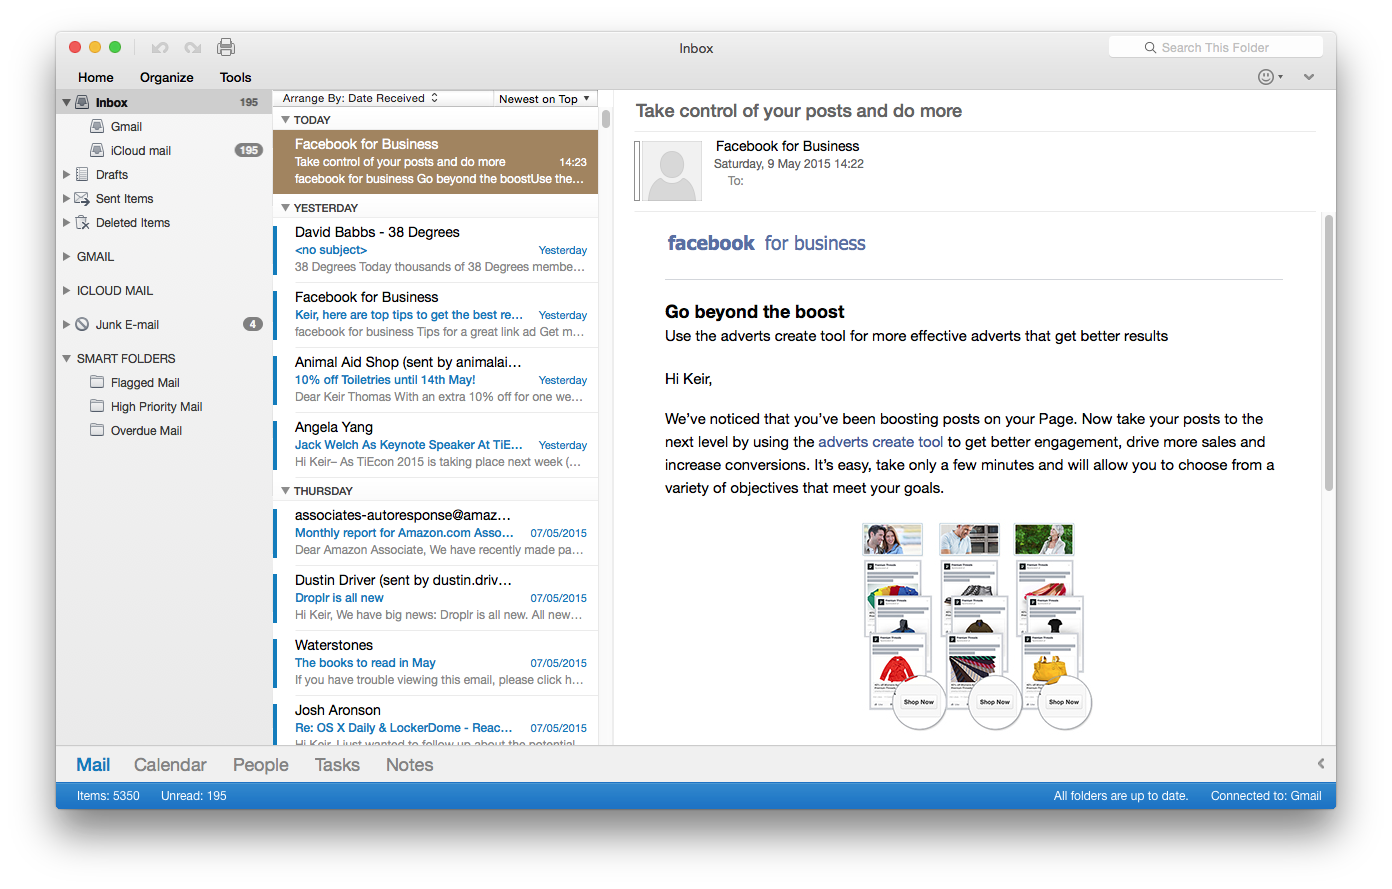 gmail calendar missing in outlook 2016 for mac